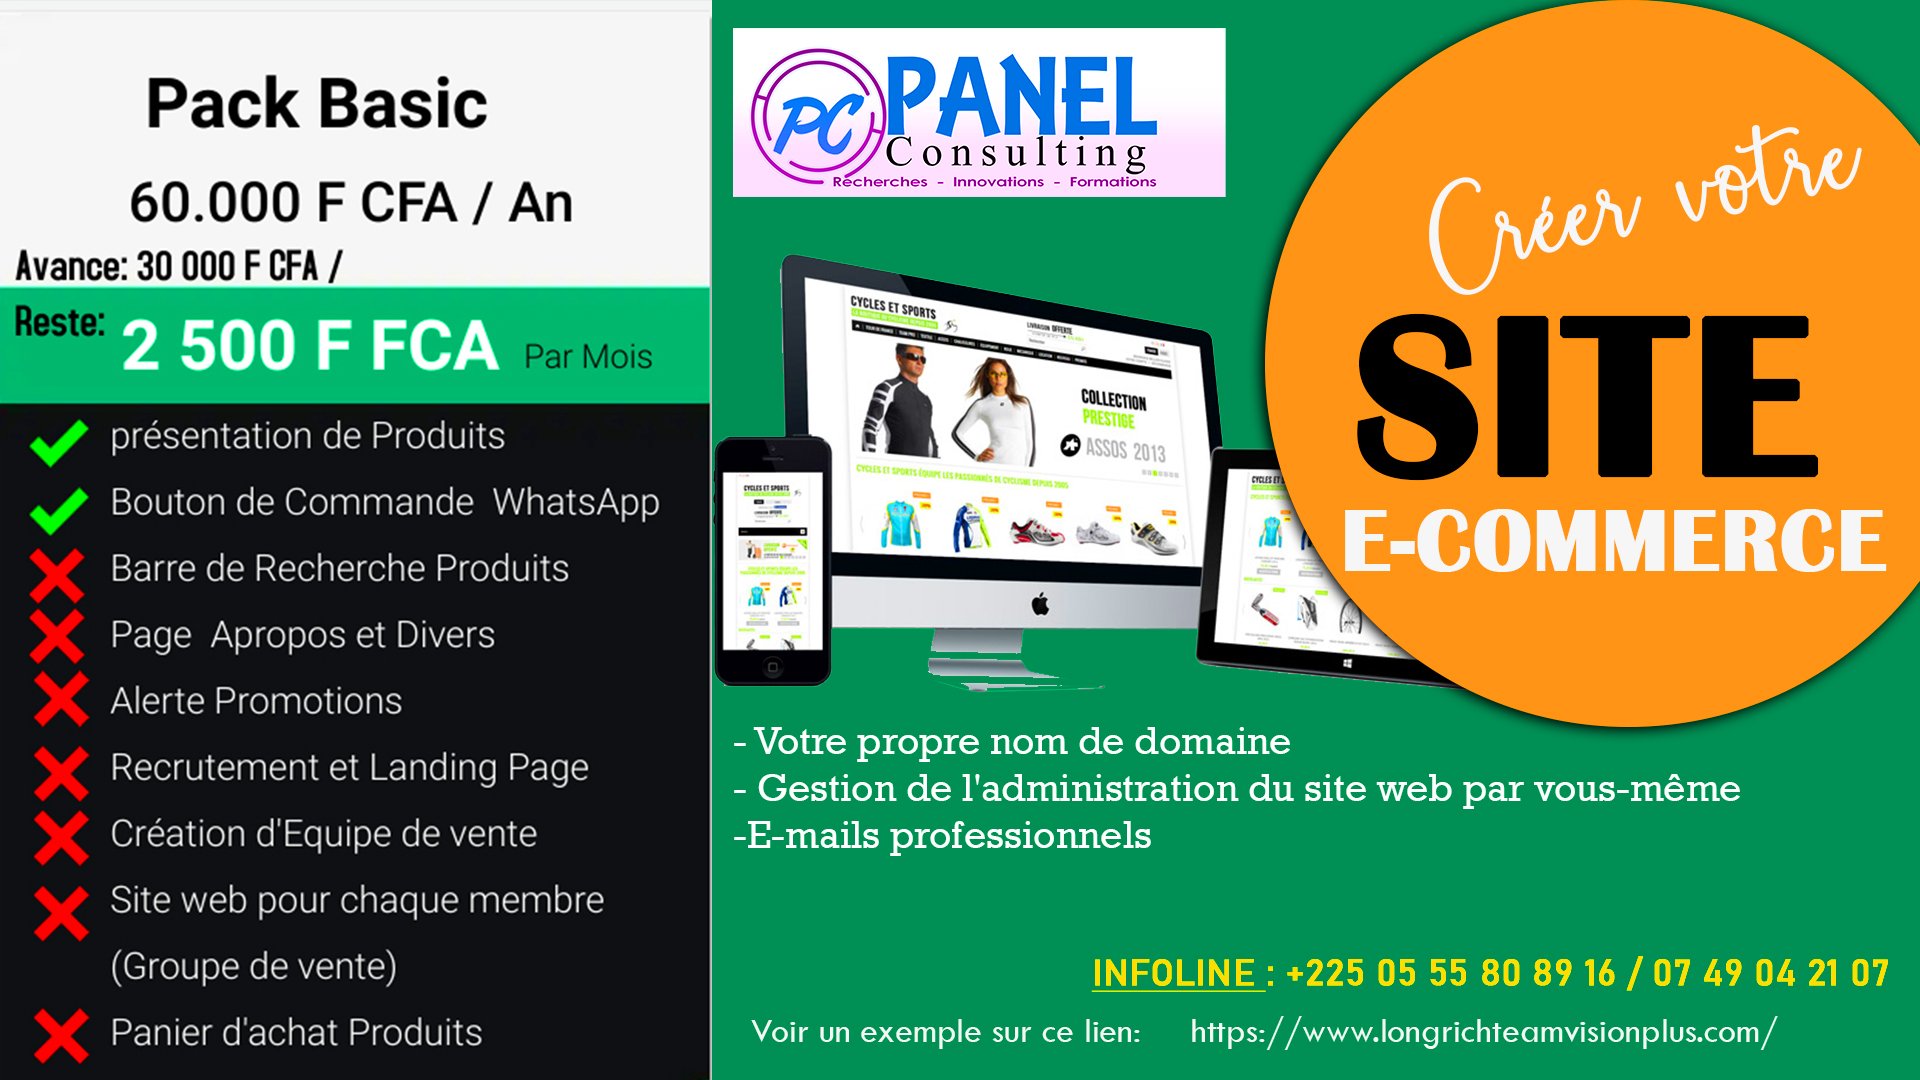 ceration-boutique-en-ligne-pack BASIC-panel-consulting.jpg-panel-consulting